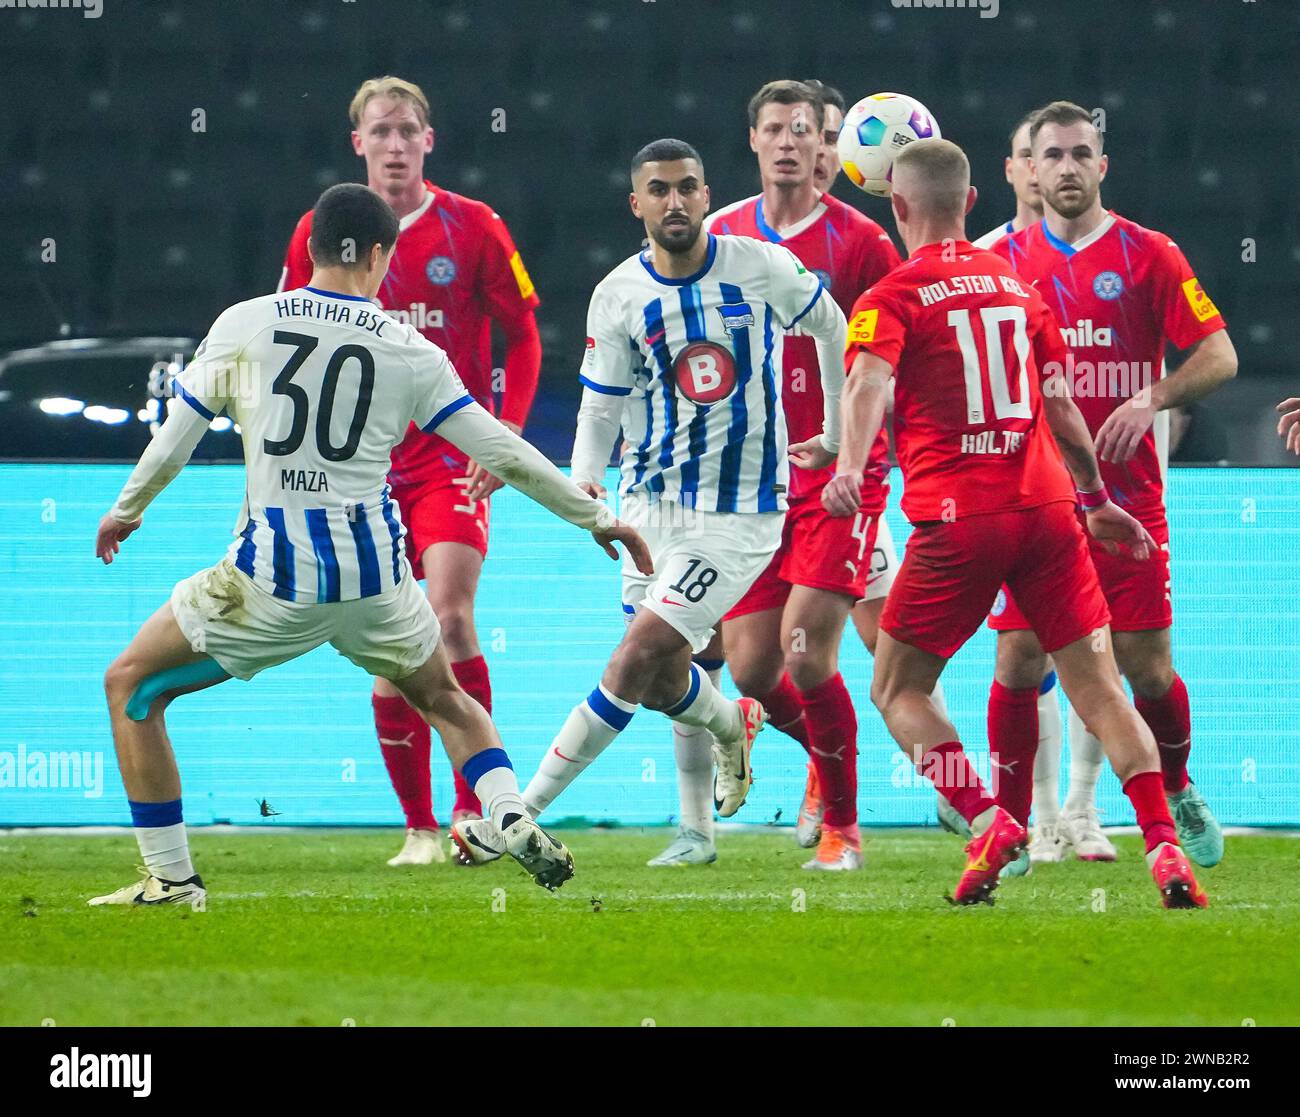 01 March 2024, Berlin: Soccer, Bundesliga 2, Matchday 24, Hertha BSC - Holstein Kiel, Olympiastadion: Hertha's Aymane Barkok (3rd from left) and Ibrahim Maza (left) against Holstein Kiel's Colin Kleine-Bekel (2nd from left), Patrick Erras, Marco Komenda (right) and Lewis Holtby (2nd from right). Photo: Soeren Stache/dpa - IMPORTANT NOTE: In accordance with the regulations of the DFL German Football League and the DFB German Football Association, it is prohibited to utilize or have utilized photographs taken in the stadium and/or of the match in the form of sequential images and/or video-like p Stock Photo